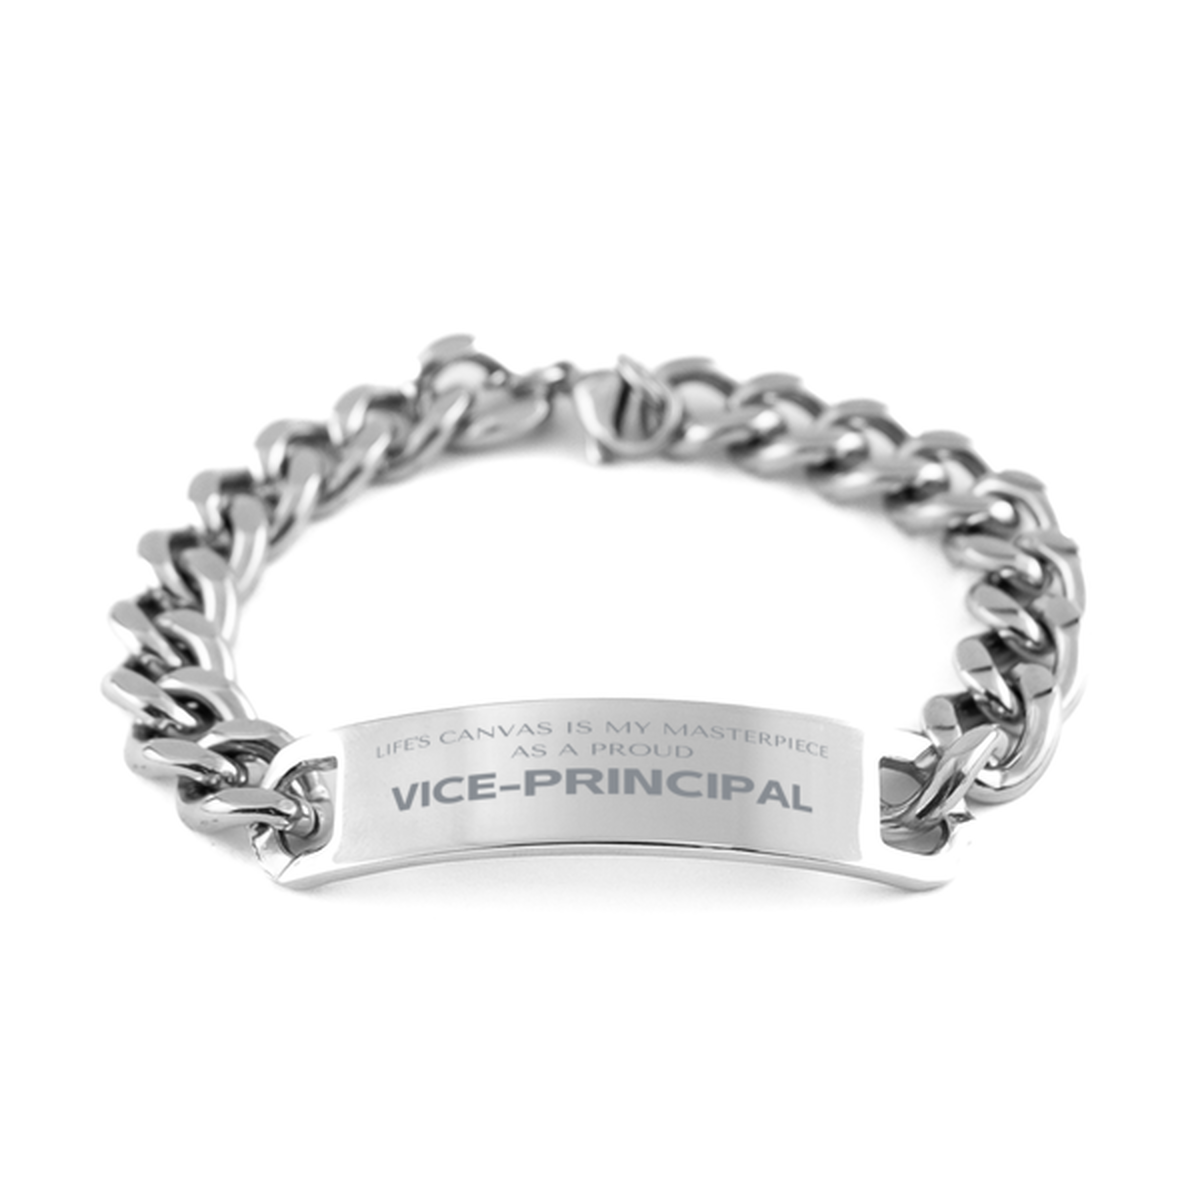 Proud Vice-principal Gifts, Life's canvas is my masterpiece, Epic Birthday Christmas Unique Cuban Chain Stainless Steel Bracelet For Vice-principal, Coworkers, Men, Women, Friends